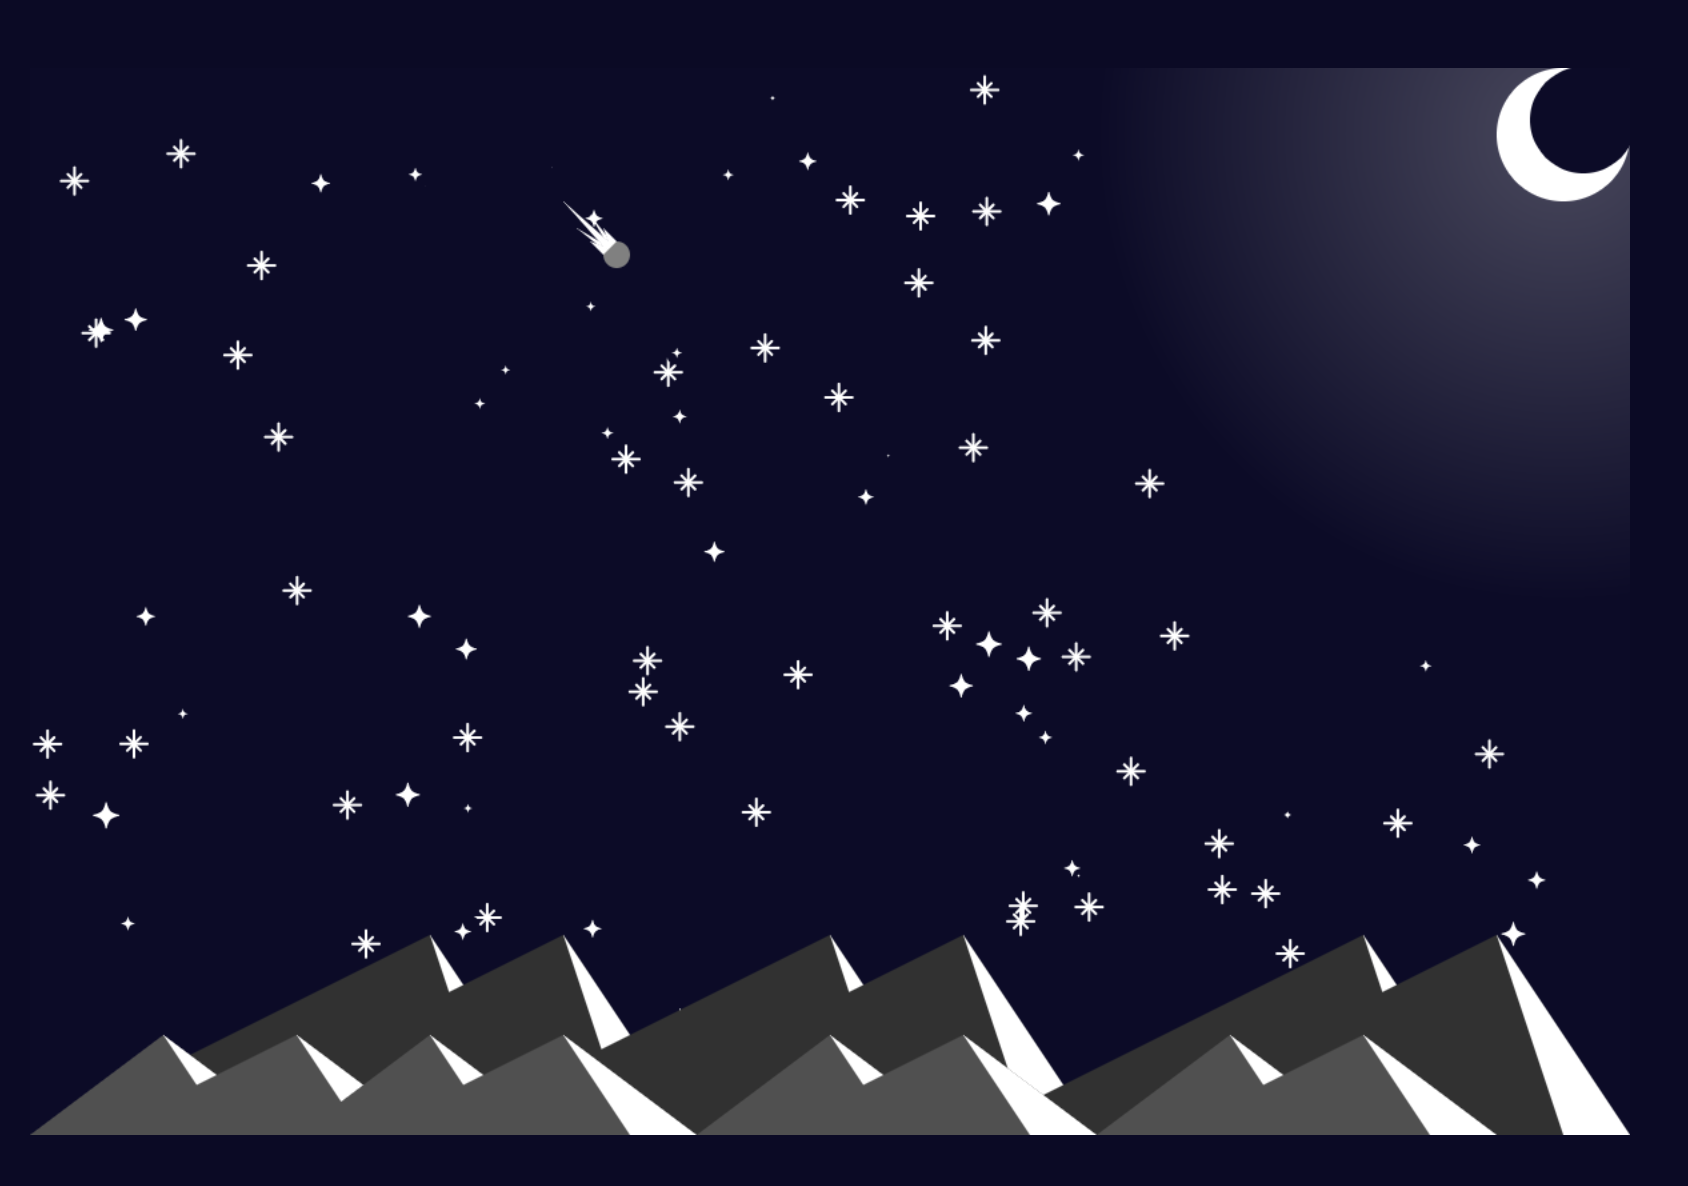 White stars against a deep blue-black sky, with a single meteor passing through. Below, rows of gray mountains are illuminated on one side by a crescent moon.